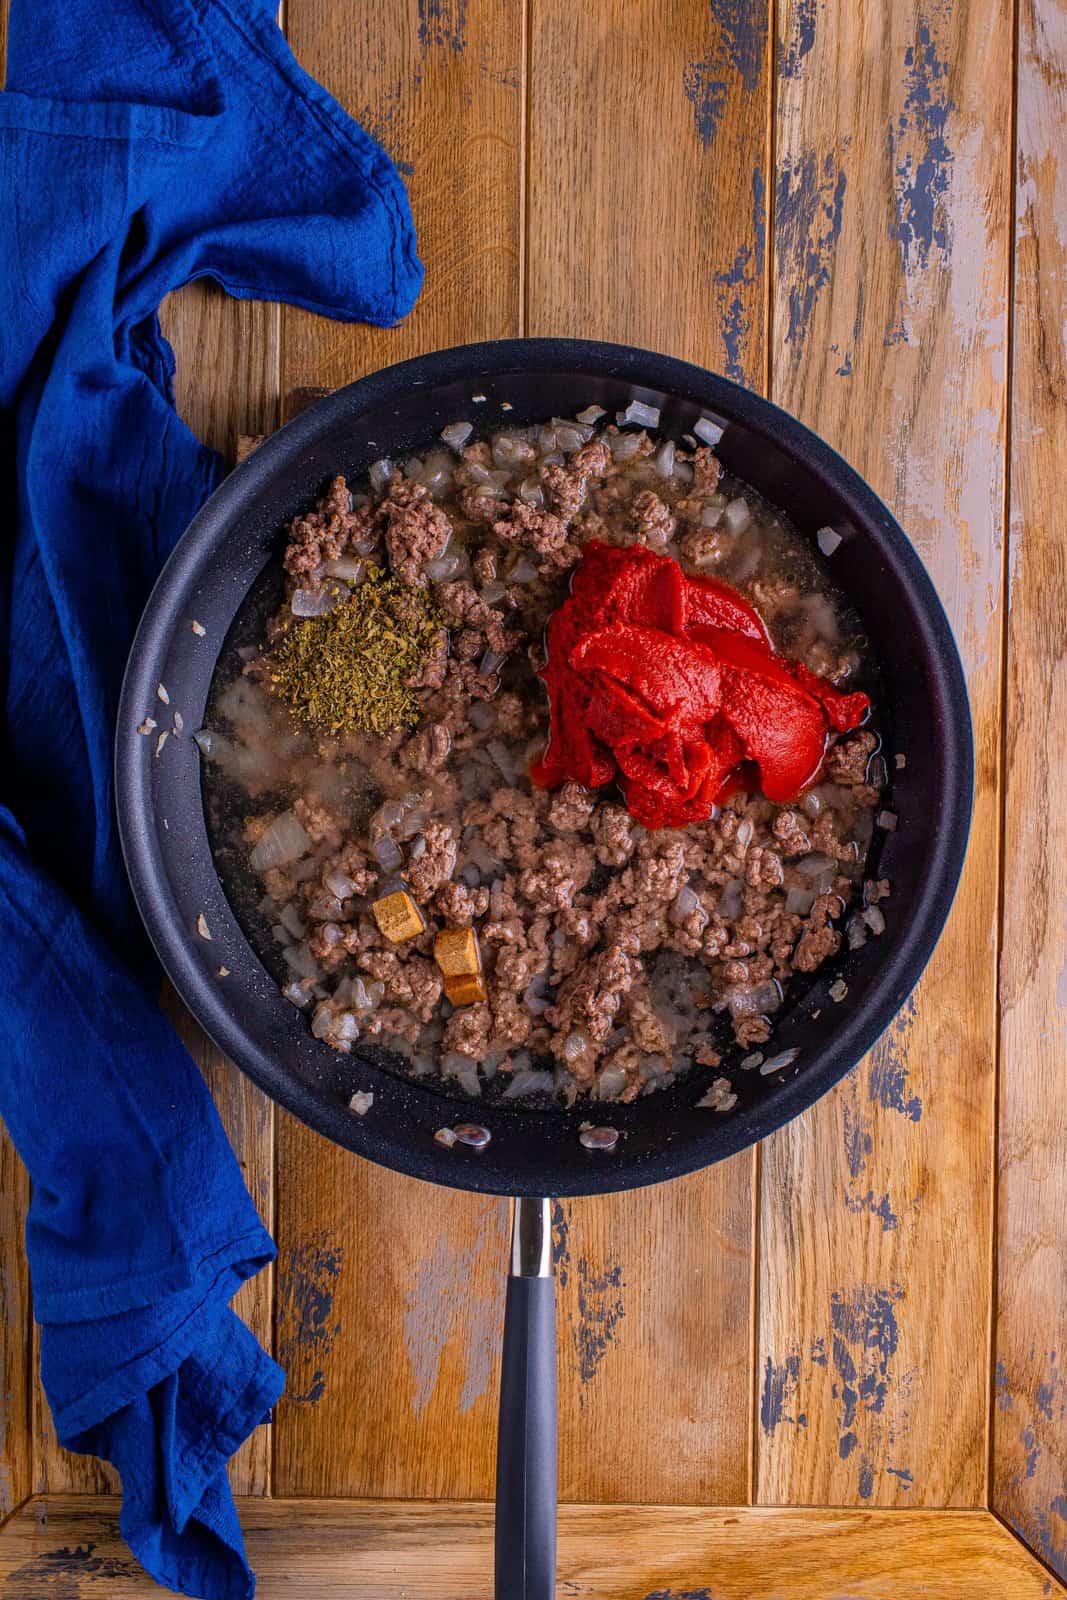 tomato sauce, oregano and beef bouillon cubes added to ground beef in pan.